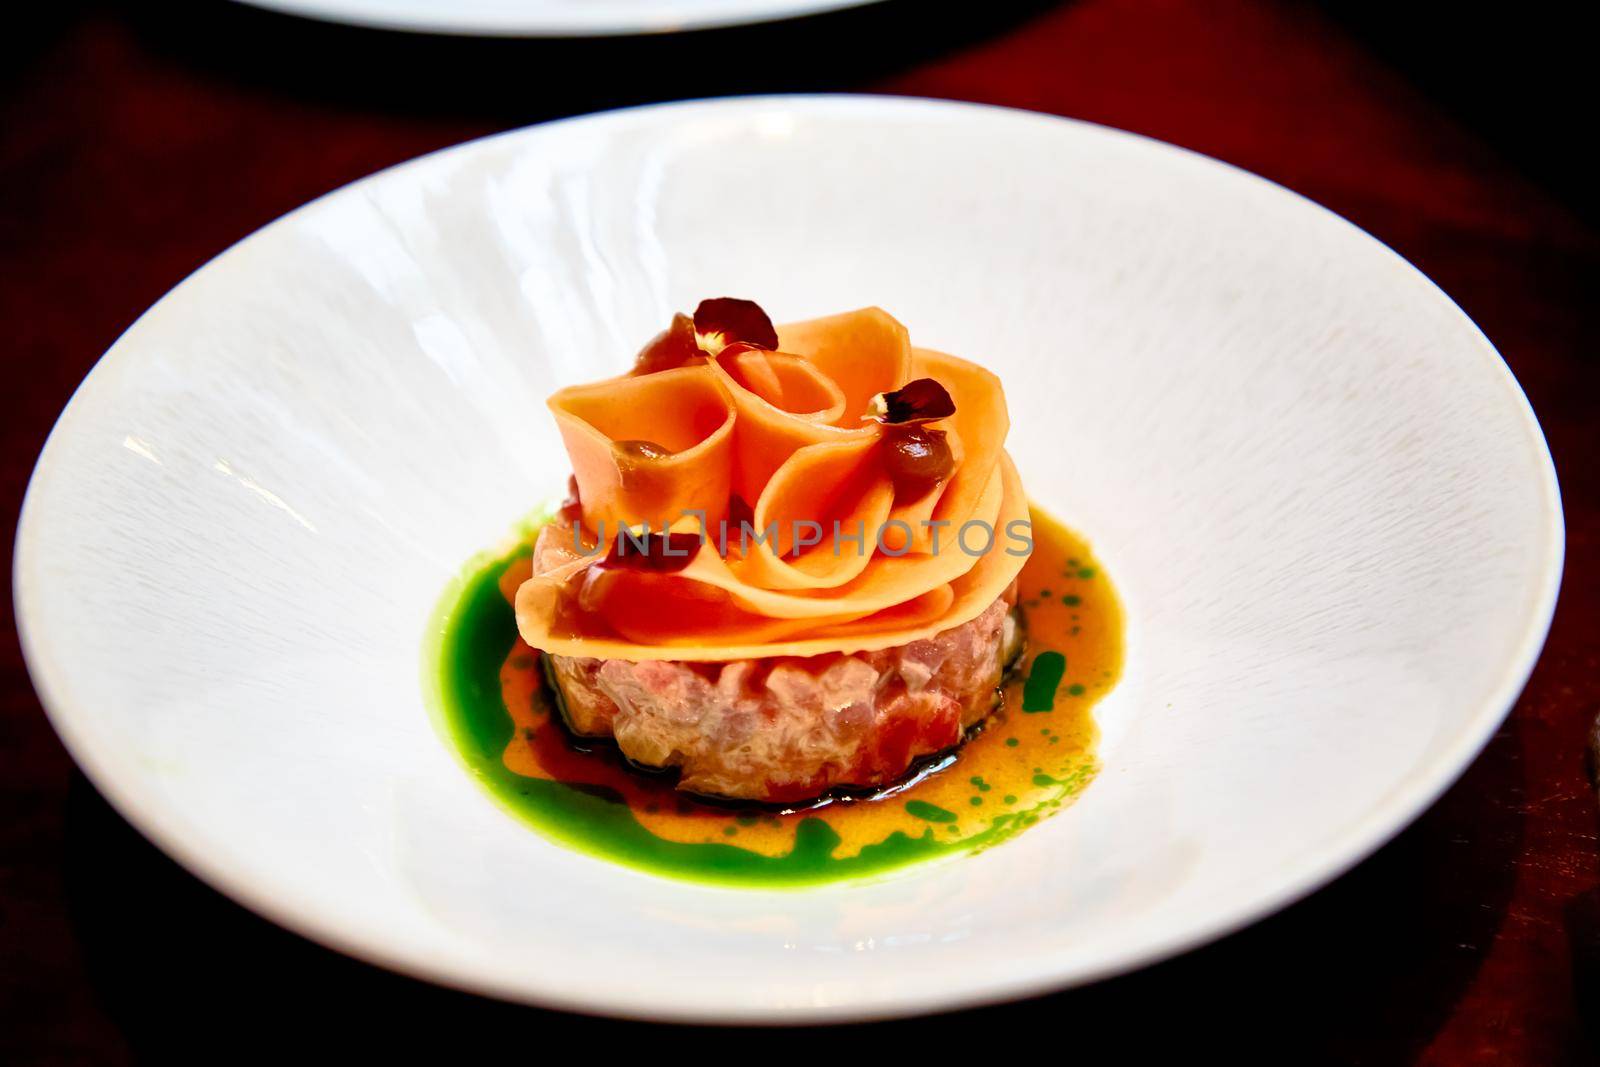 Beef tartare decorated with carrot slices